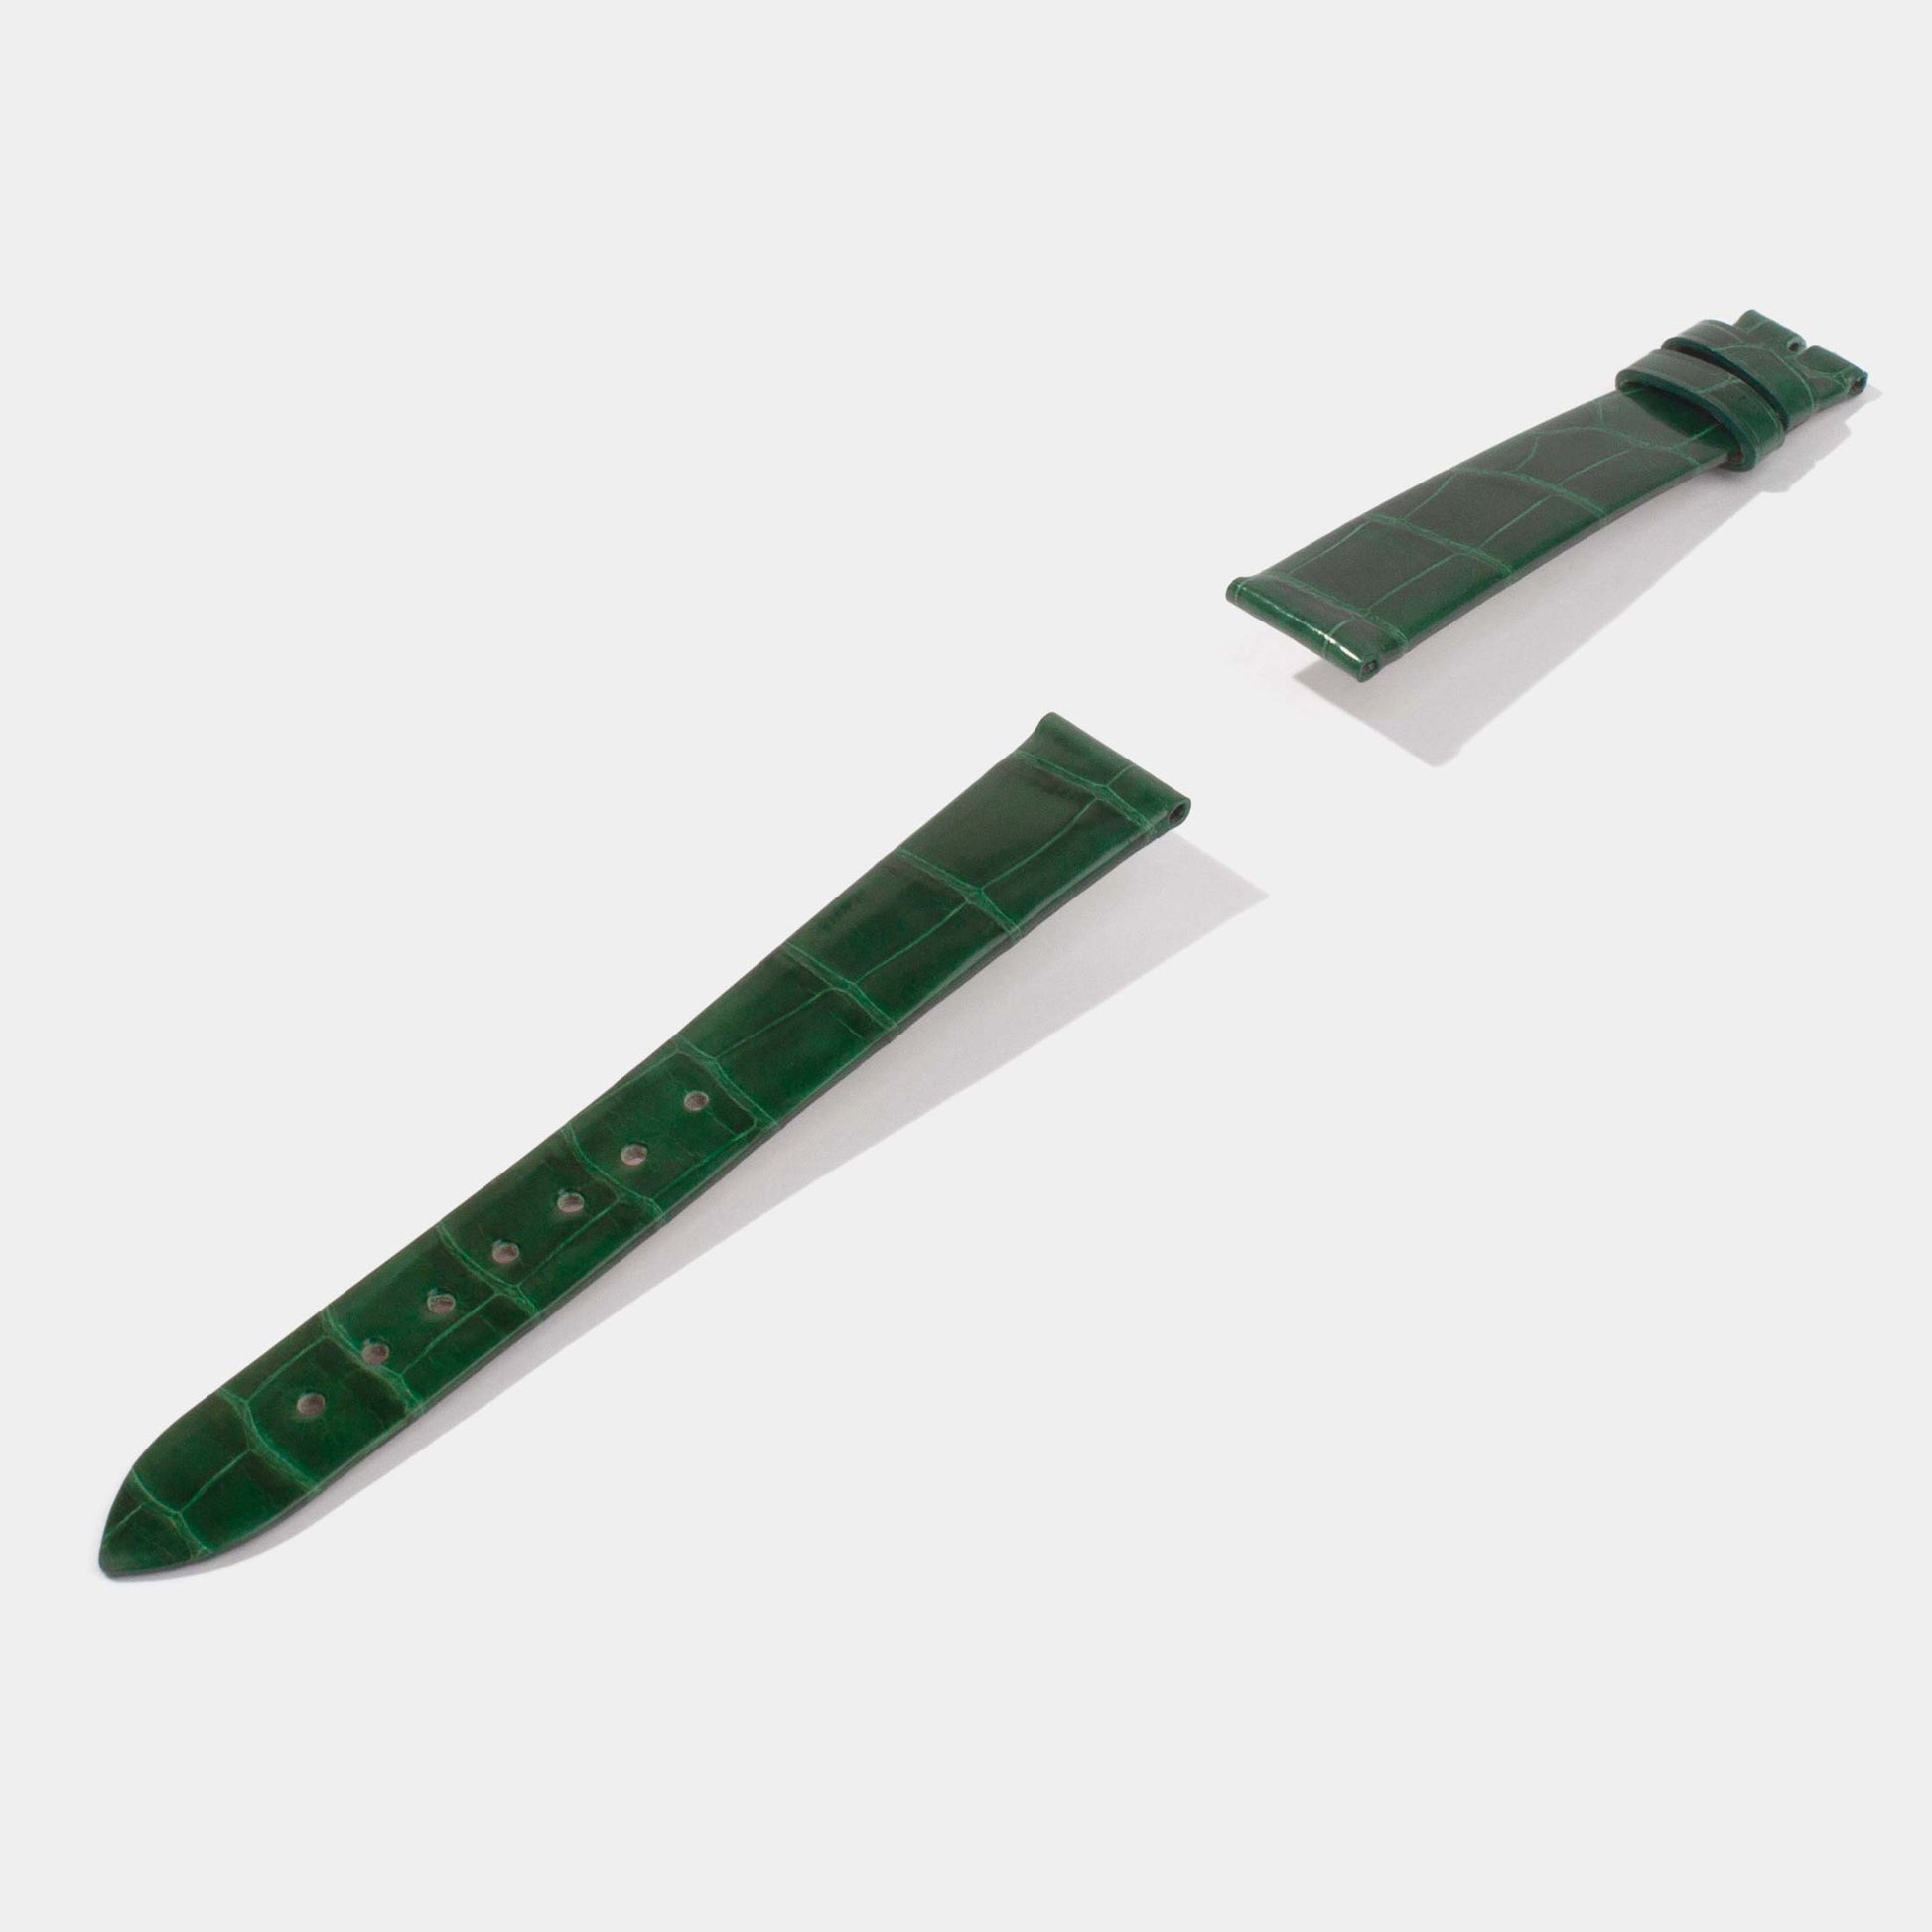 Replacement Watch Straps for Reverso | Square Scale Shiny Alligator | Jaeger-LeCoultre Jessenia Original